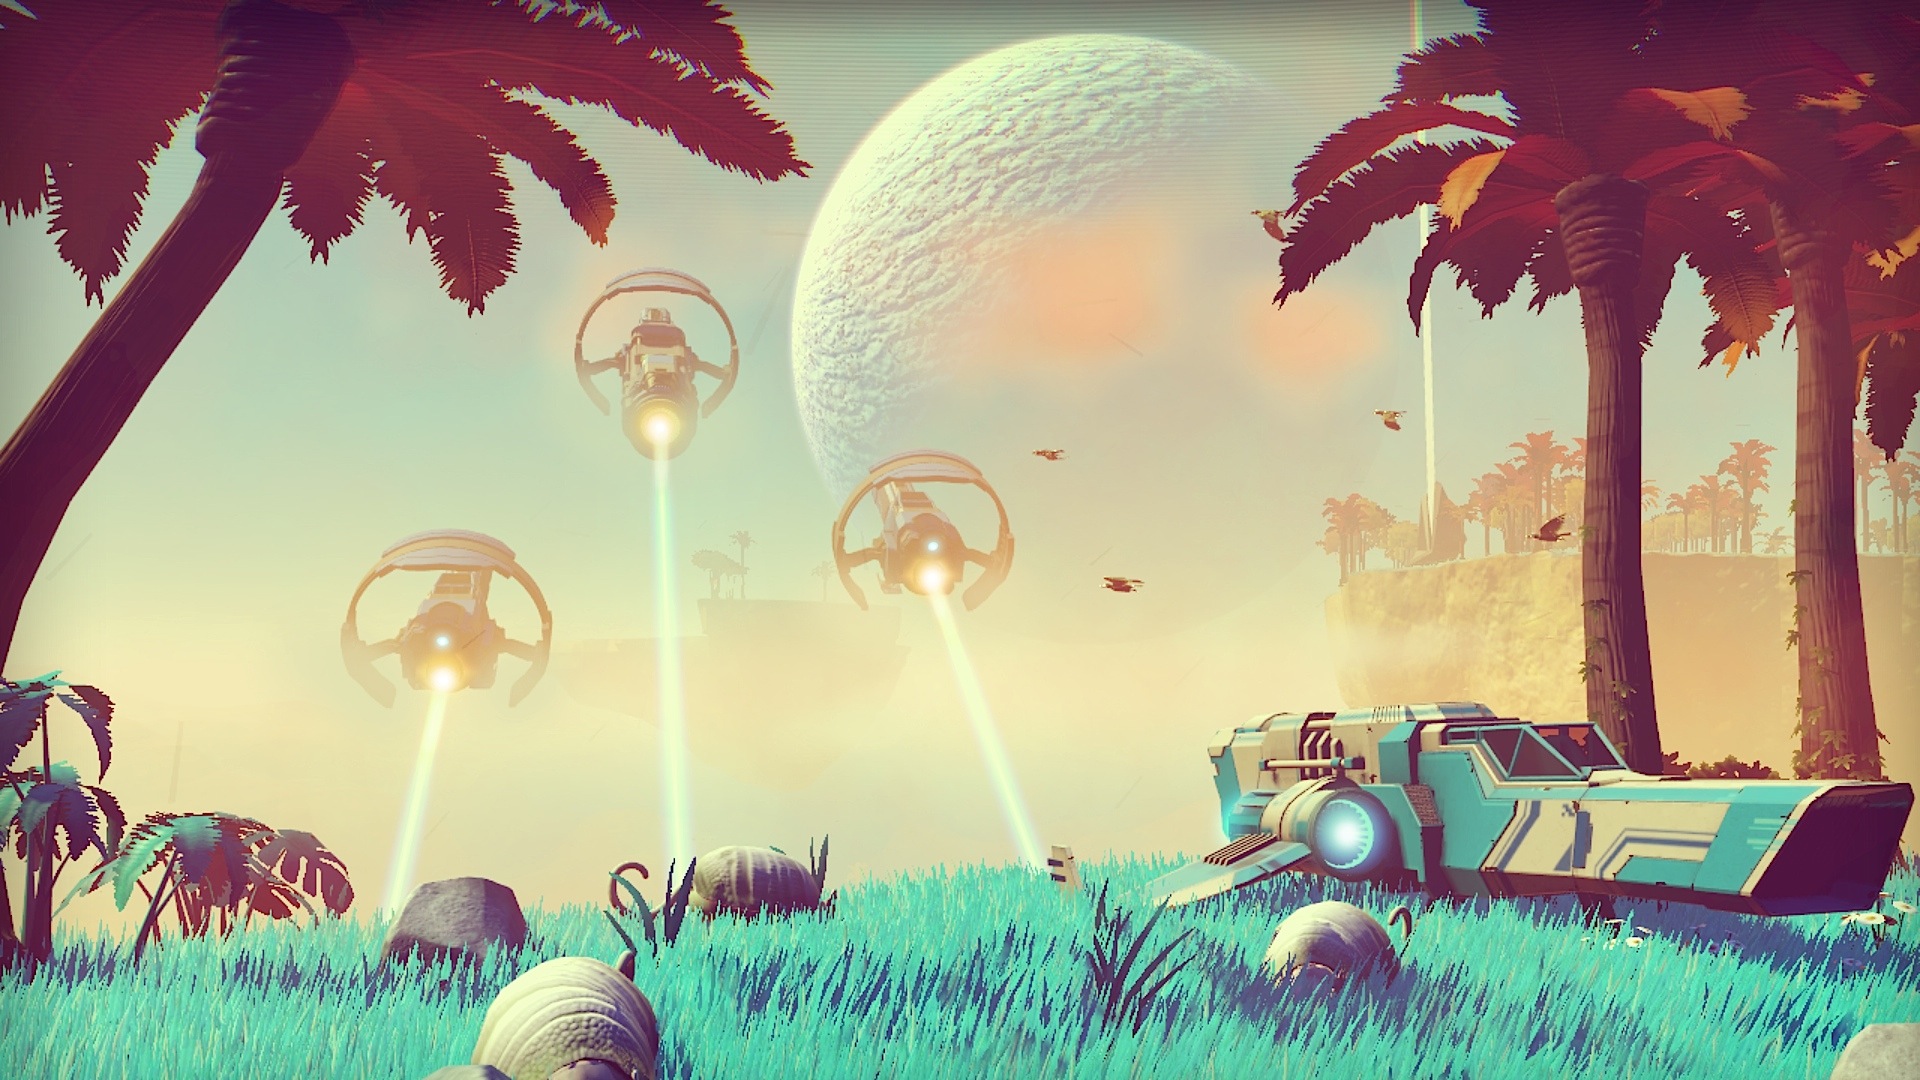 This is not how NMS look in reality. Sorry!